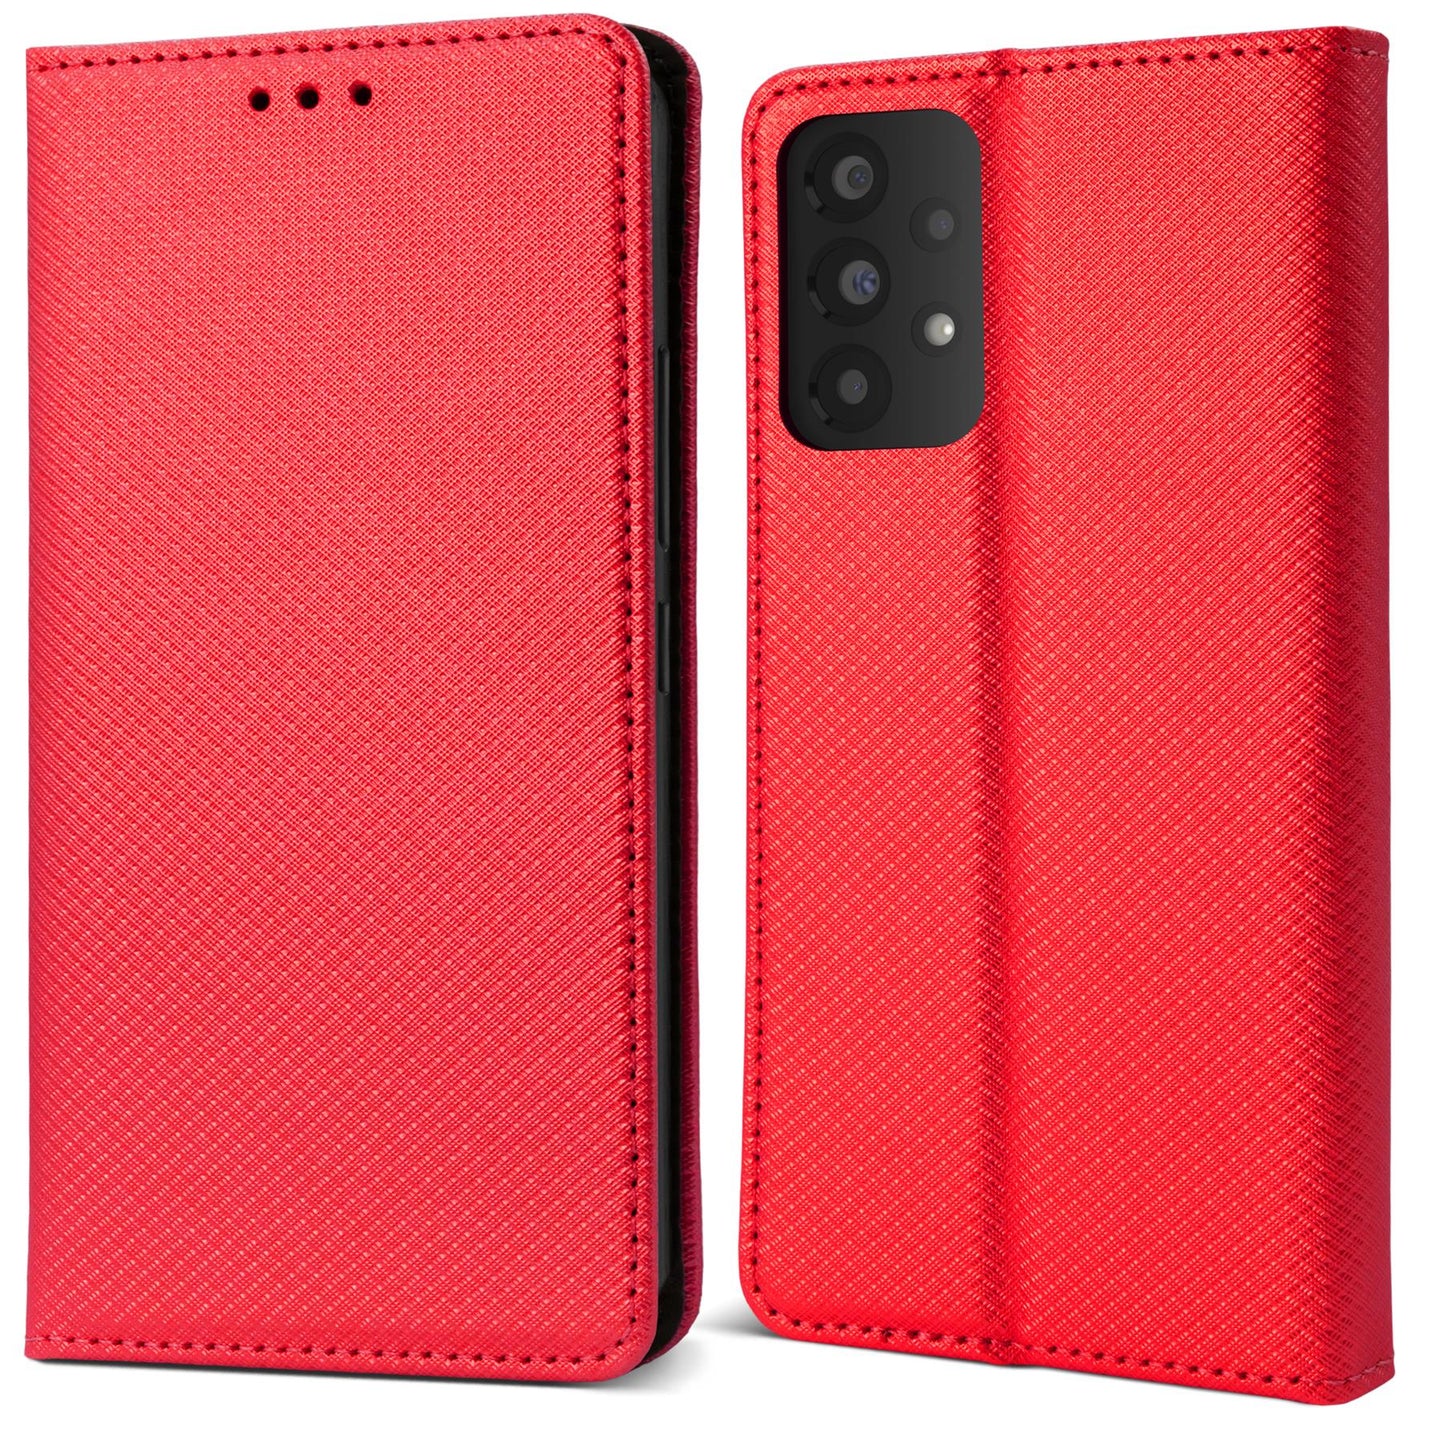 Moozy Case Flip Cover for Samsung A33 5G, Red - Smart Magnetic Flip Case Flip Folio Wallet Case with Card Holder and Stand, Credit Card Slots, Kickstand Function